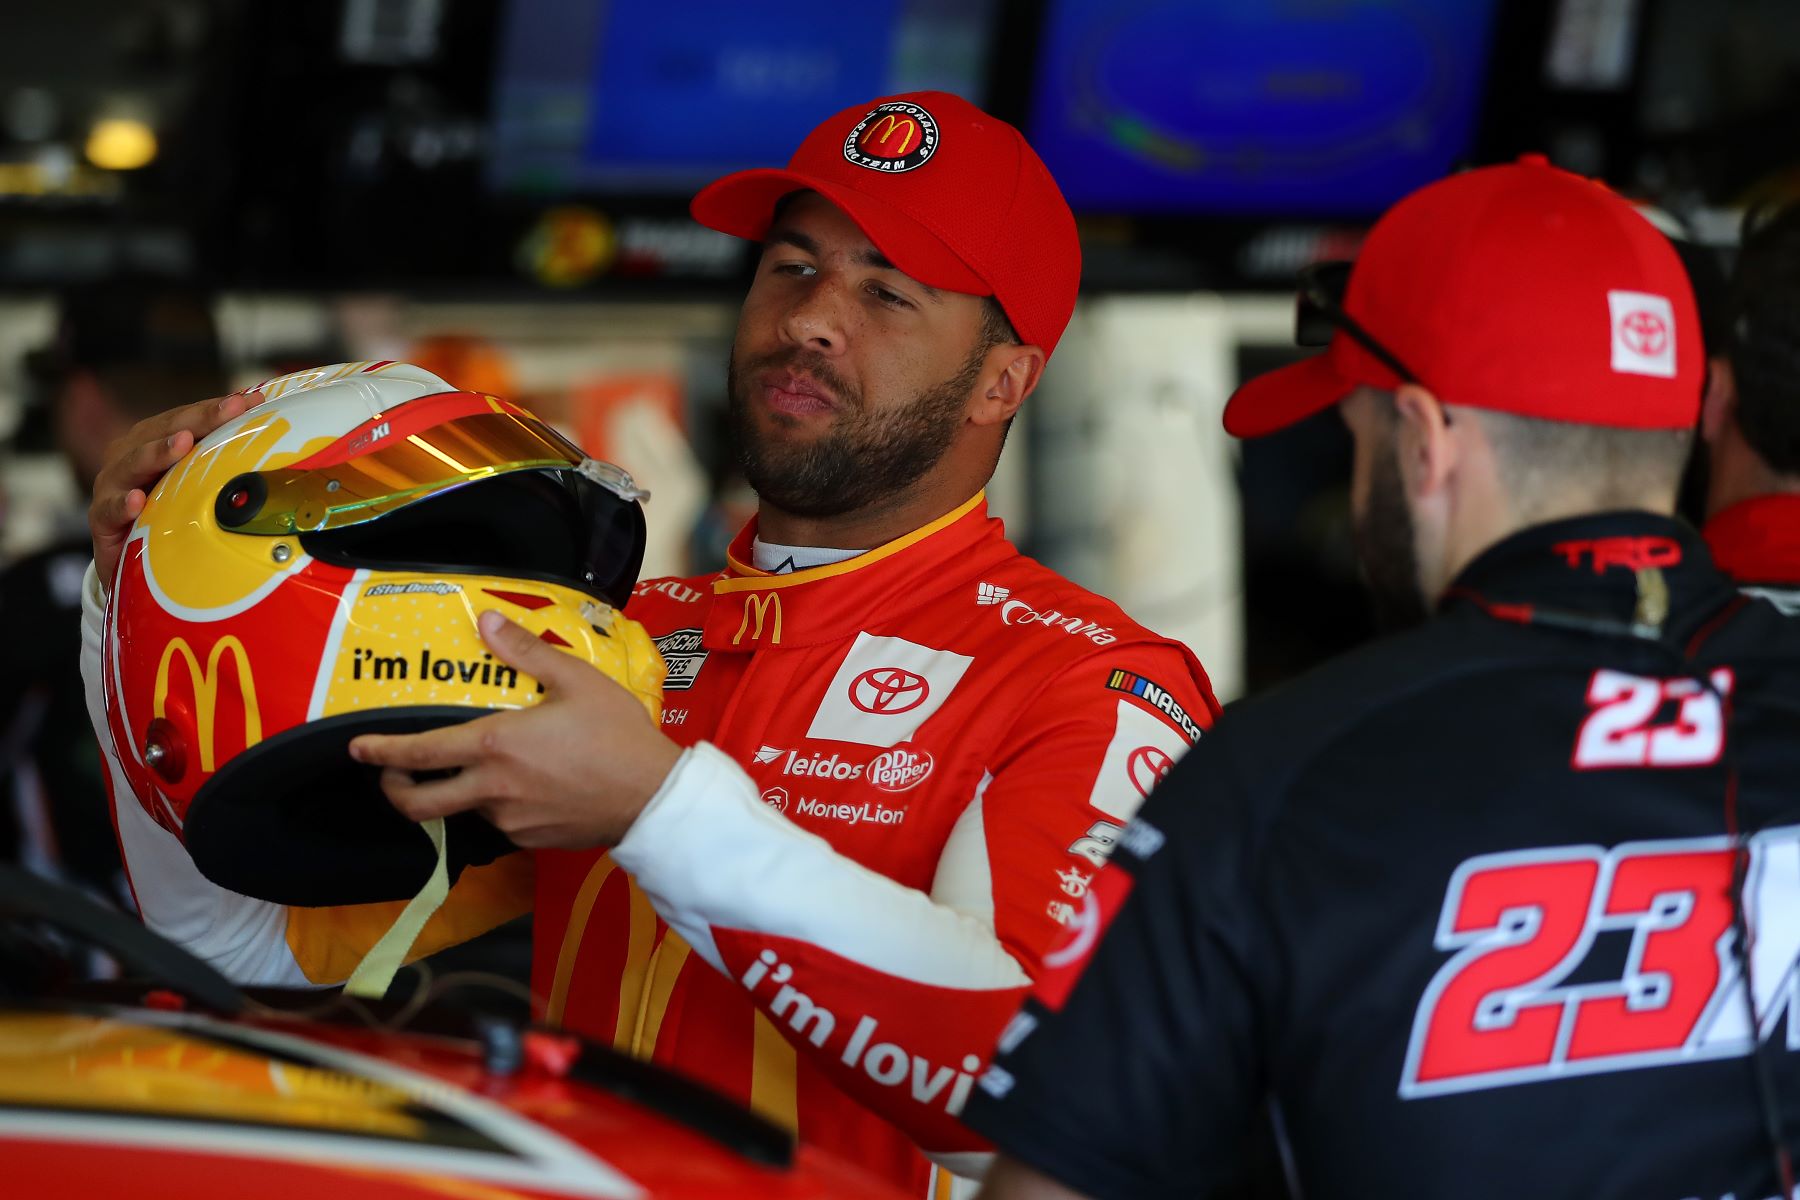 #23 McDonald's Toyota driver Bubba Wallace in practice for the NASCAR Cup Series Fold of Honor QuikTrip 500